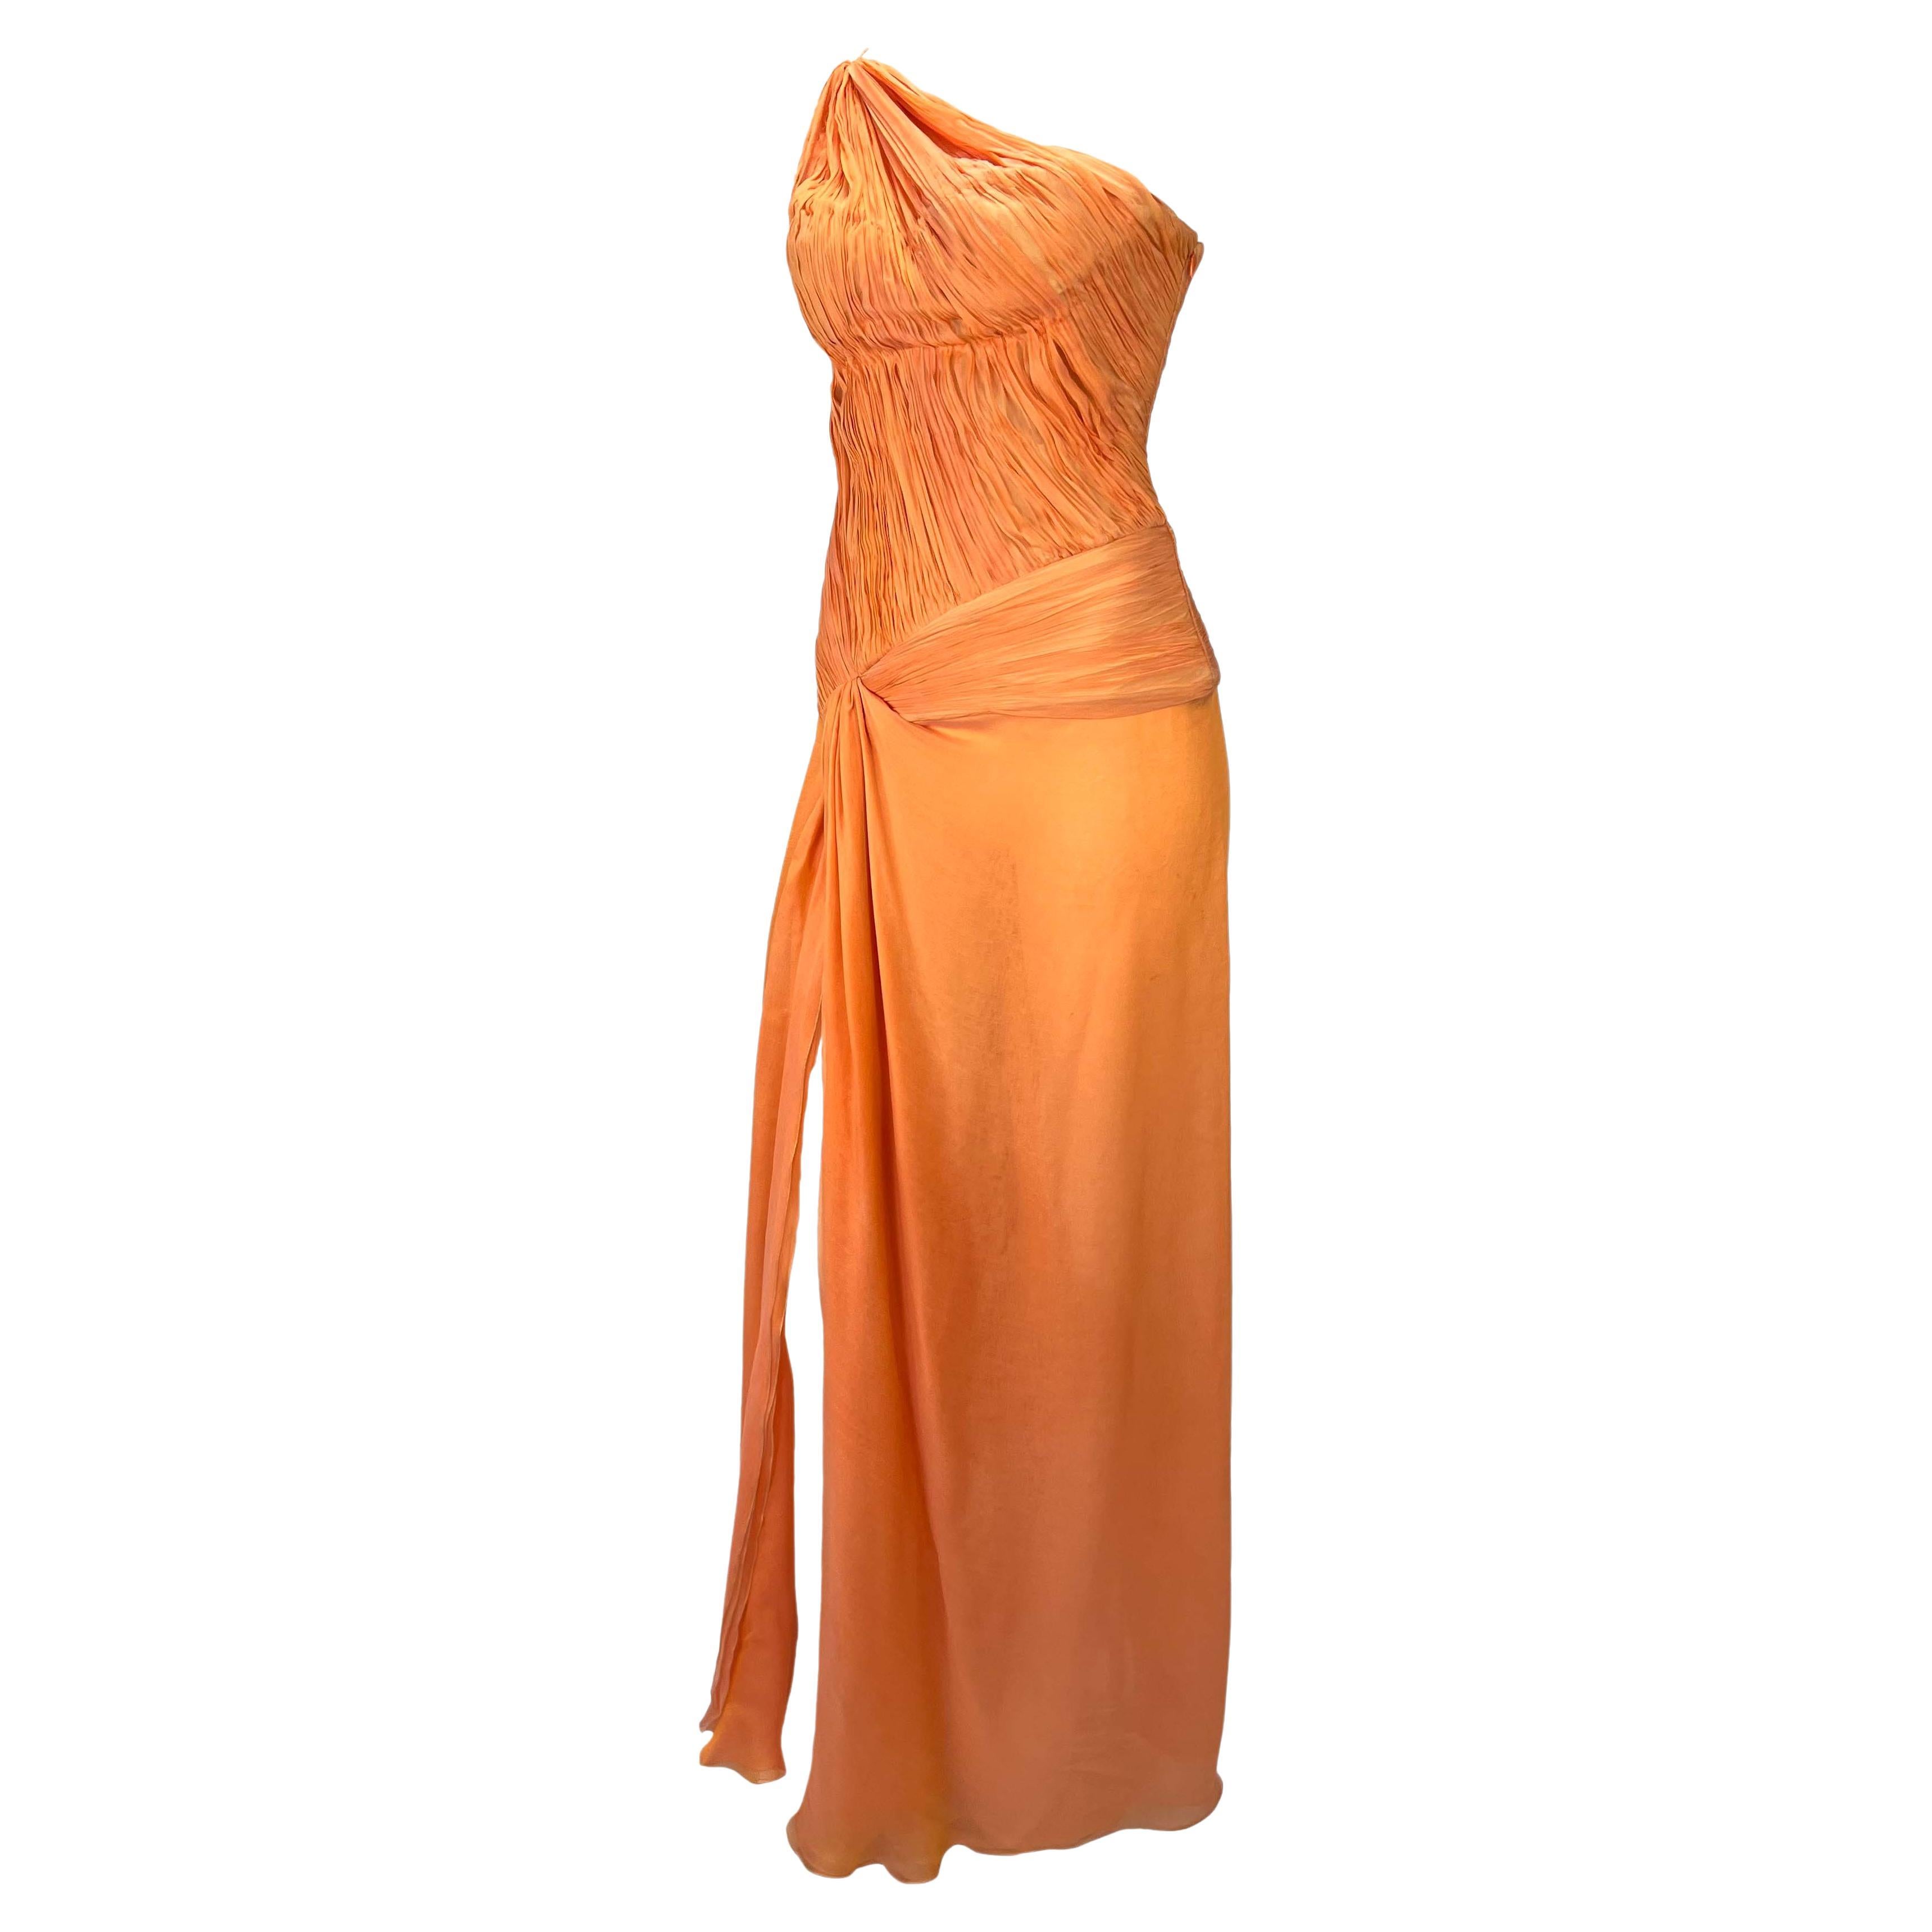 Presenting a stunning bright orange ruched Roberto Cavalli gown. From the Spring/Summer 2005 collection, this asymmetric gown is constructed entirely of light persimmon silk chiffon. The dress features a single shoulder strap, ruched body, flowing